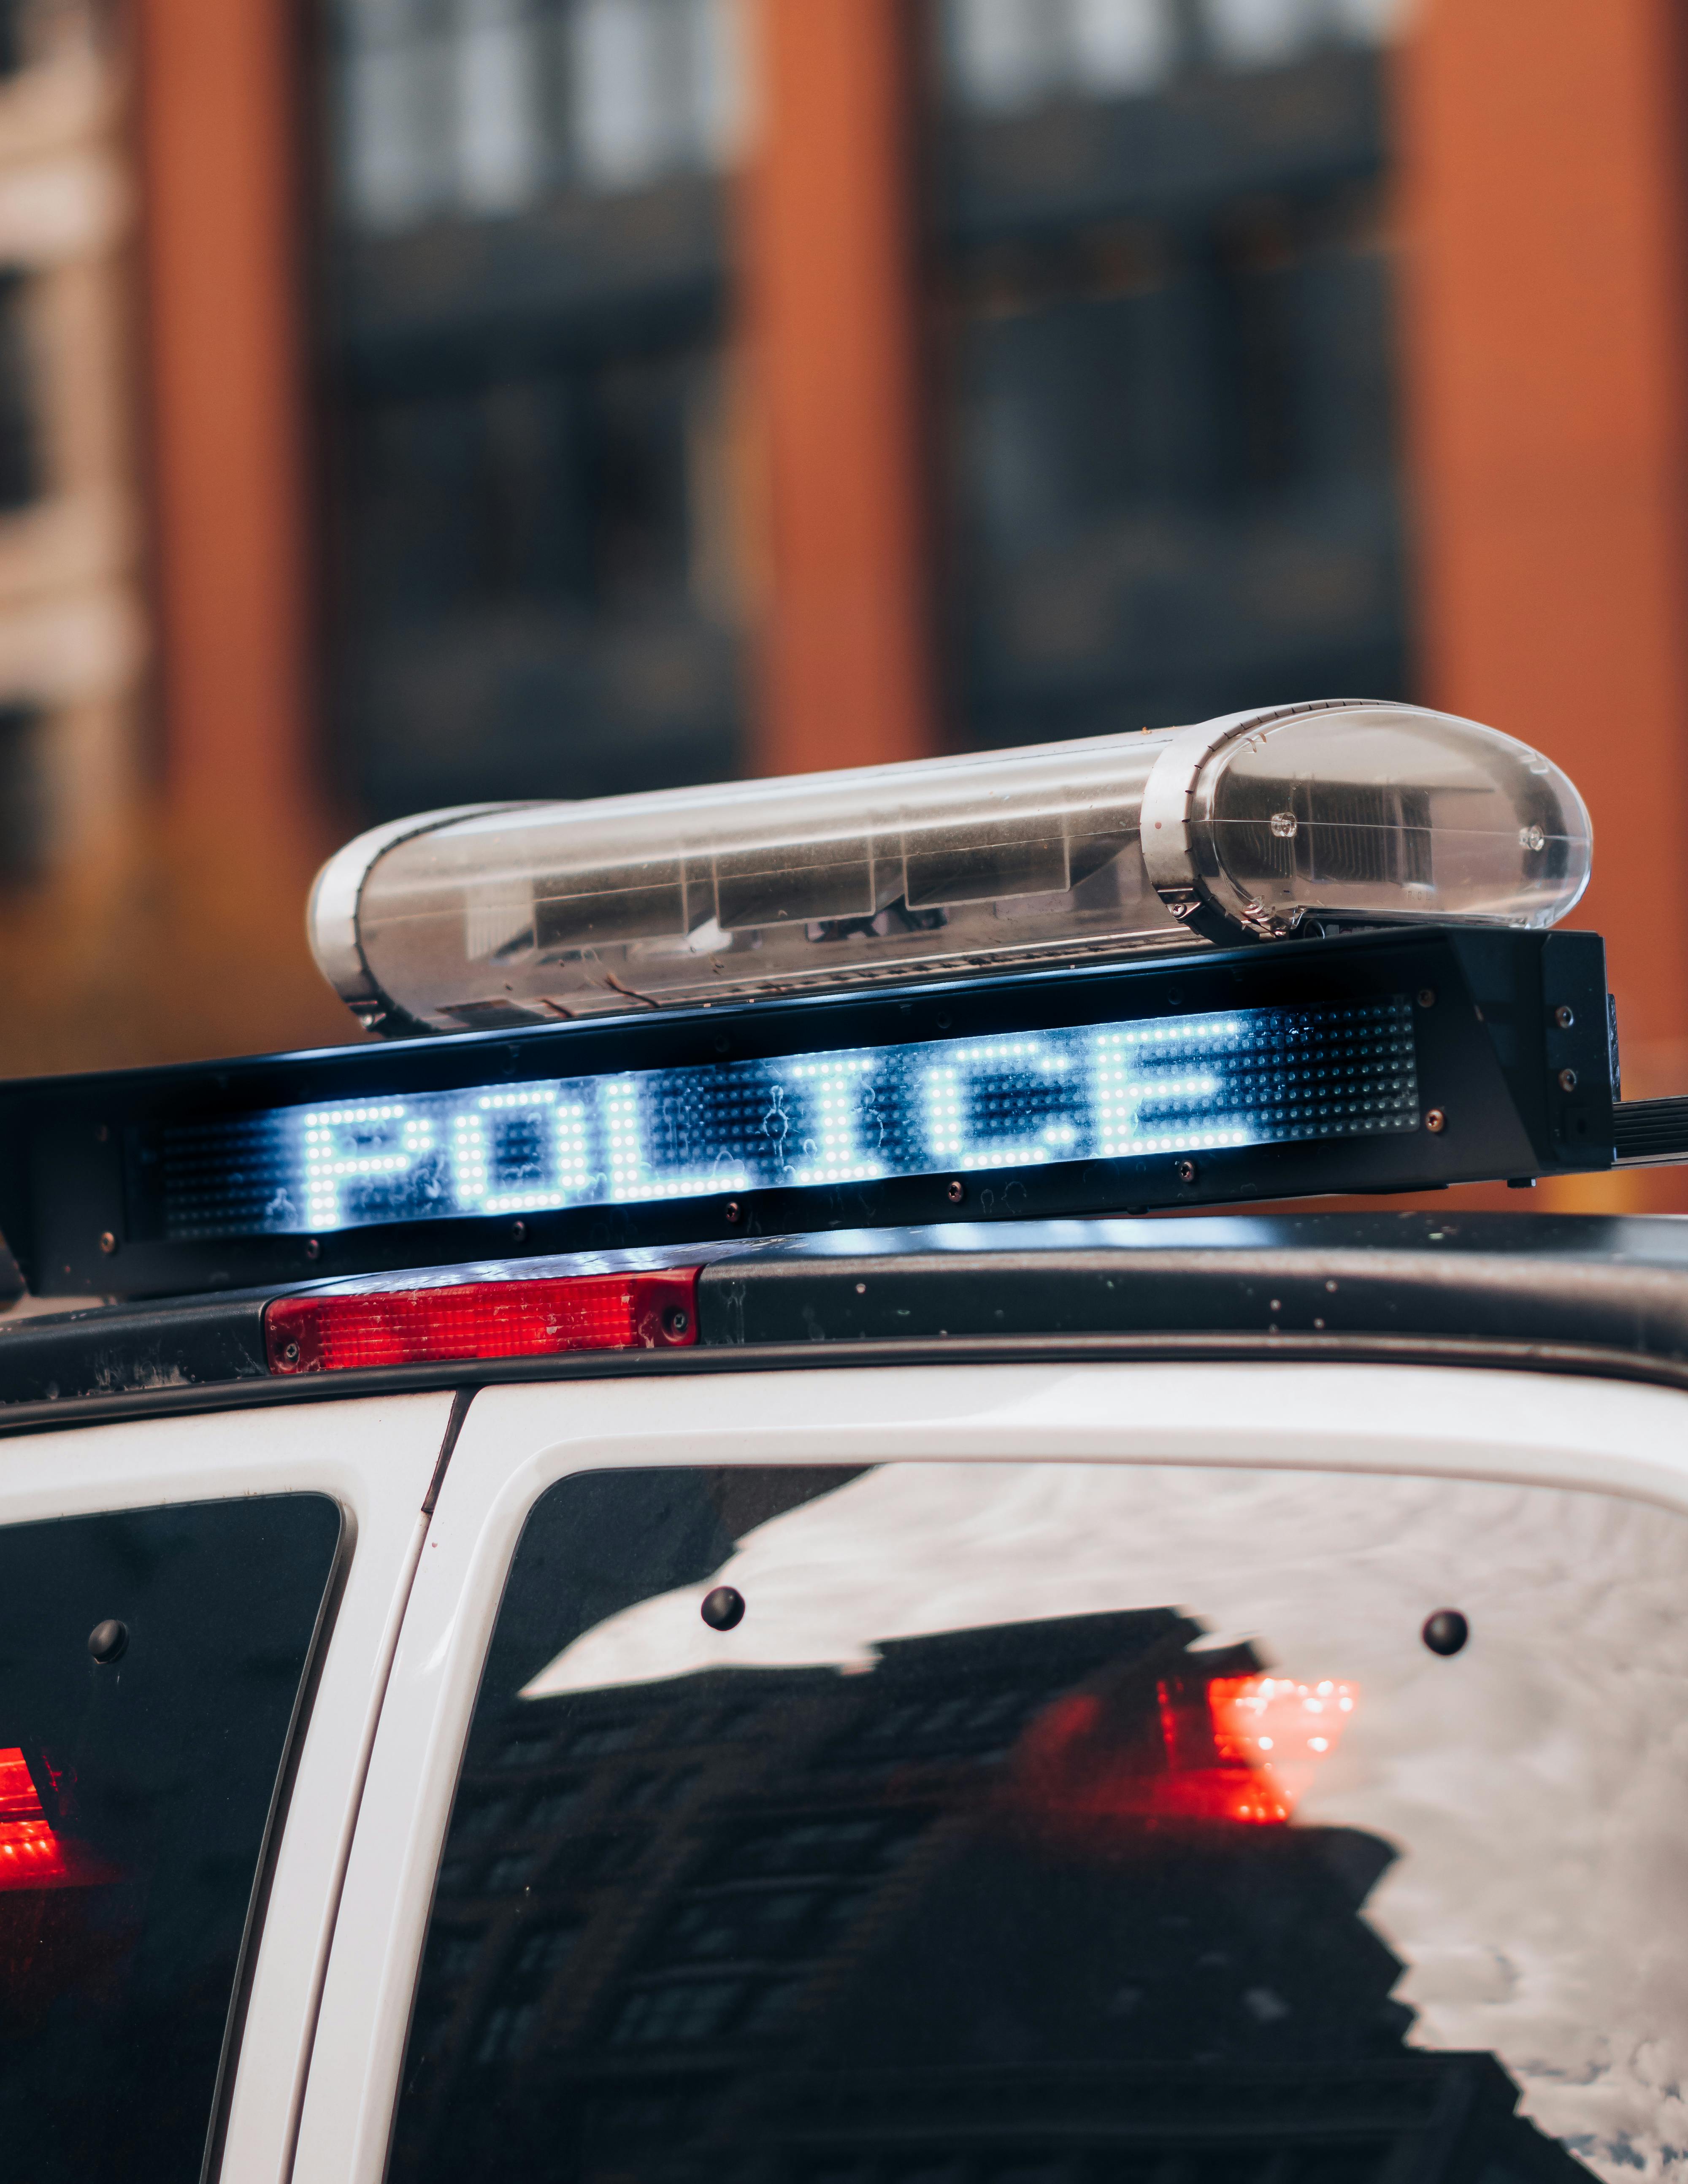 The top of a police car | Source: Pexels